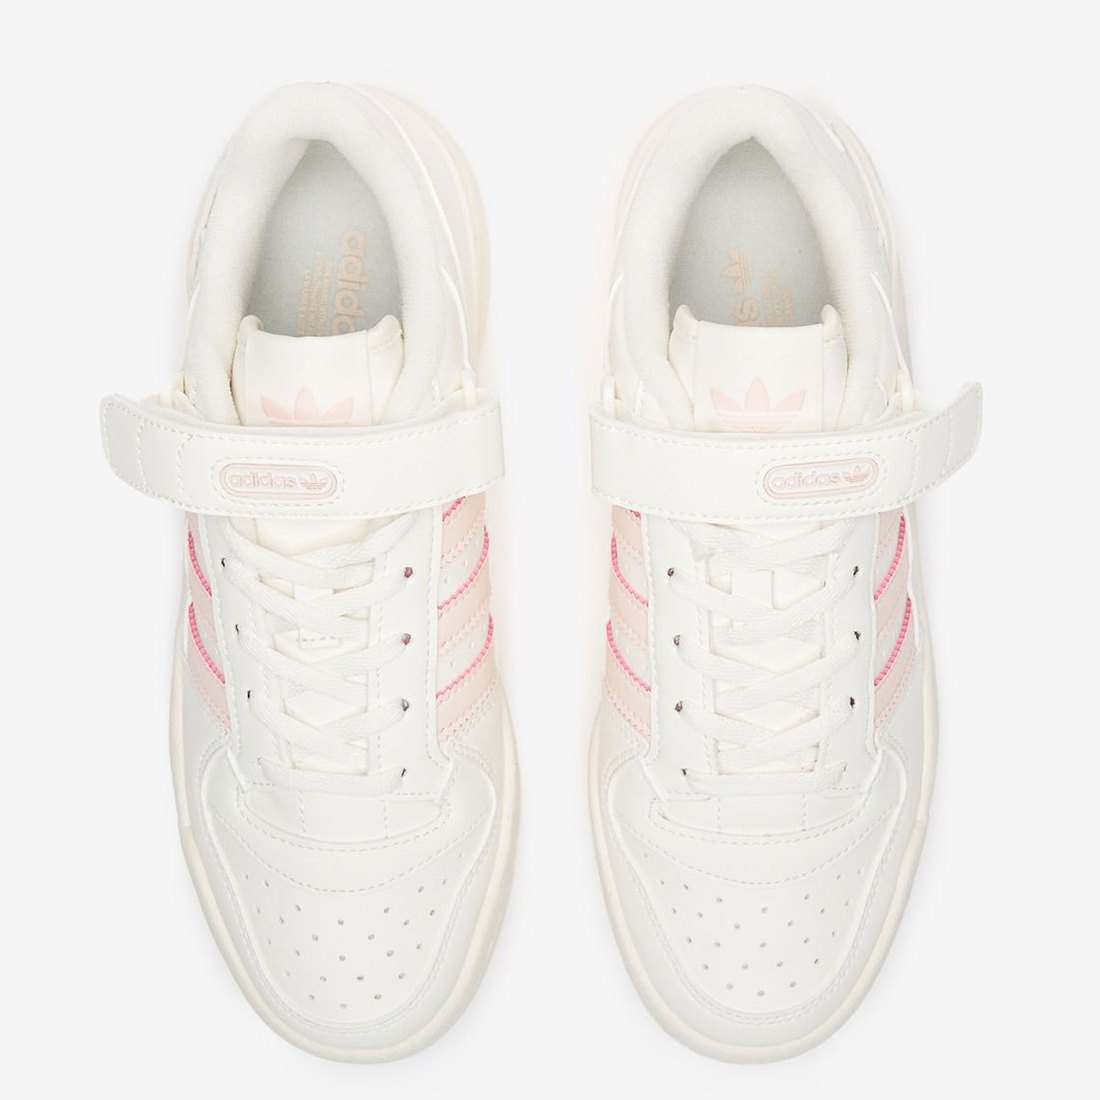 adidas Forum Low Womens GZ7064 Release Date